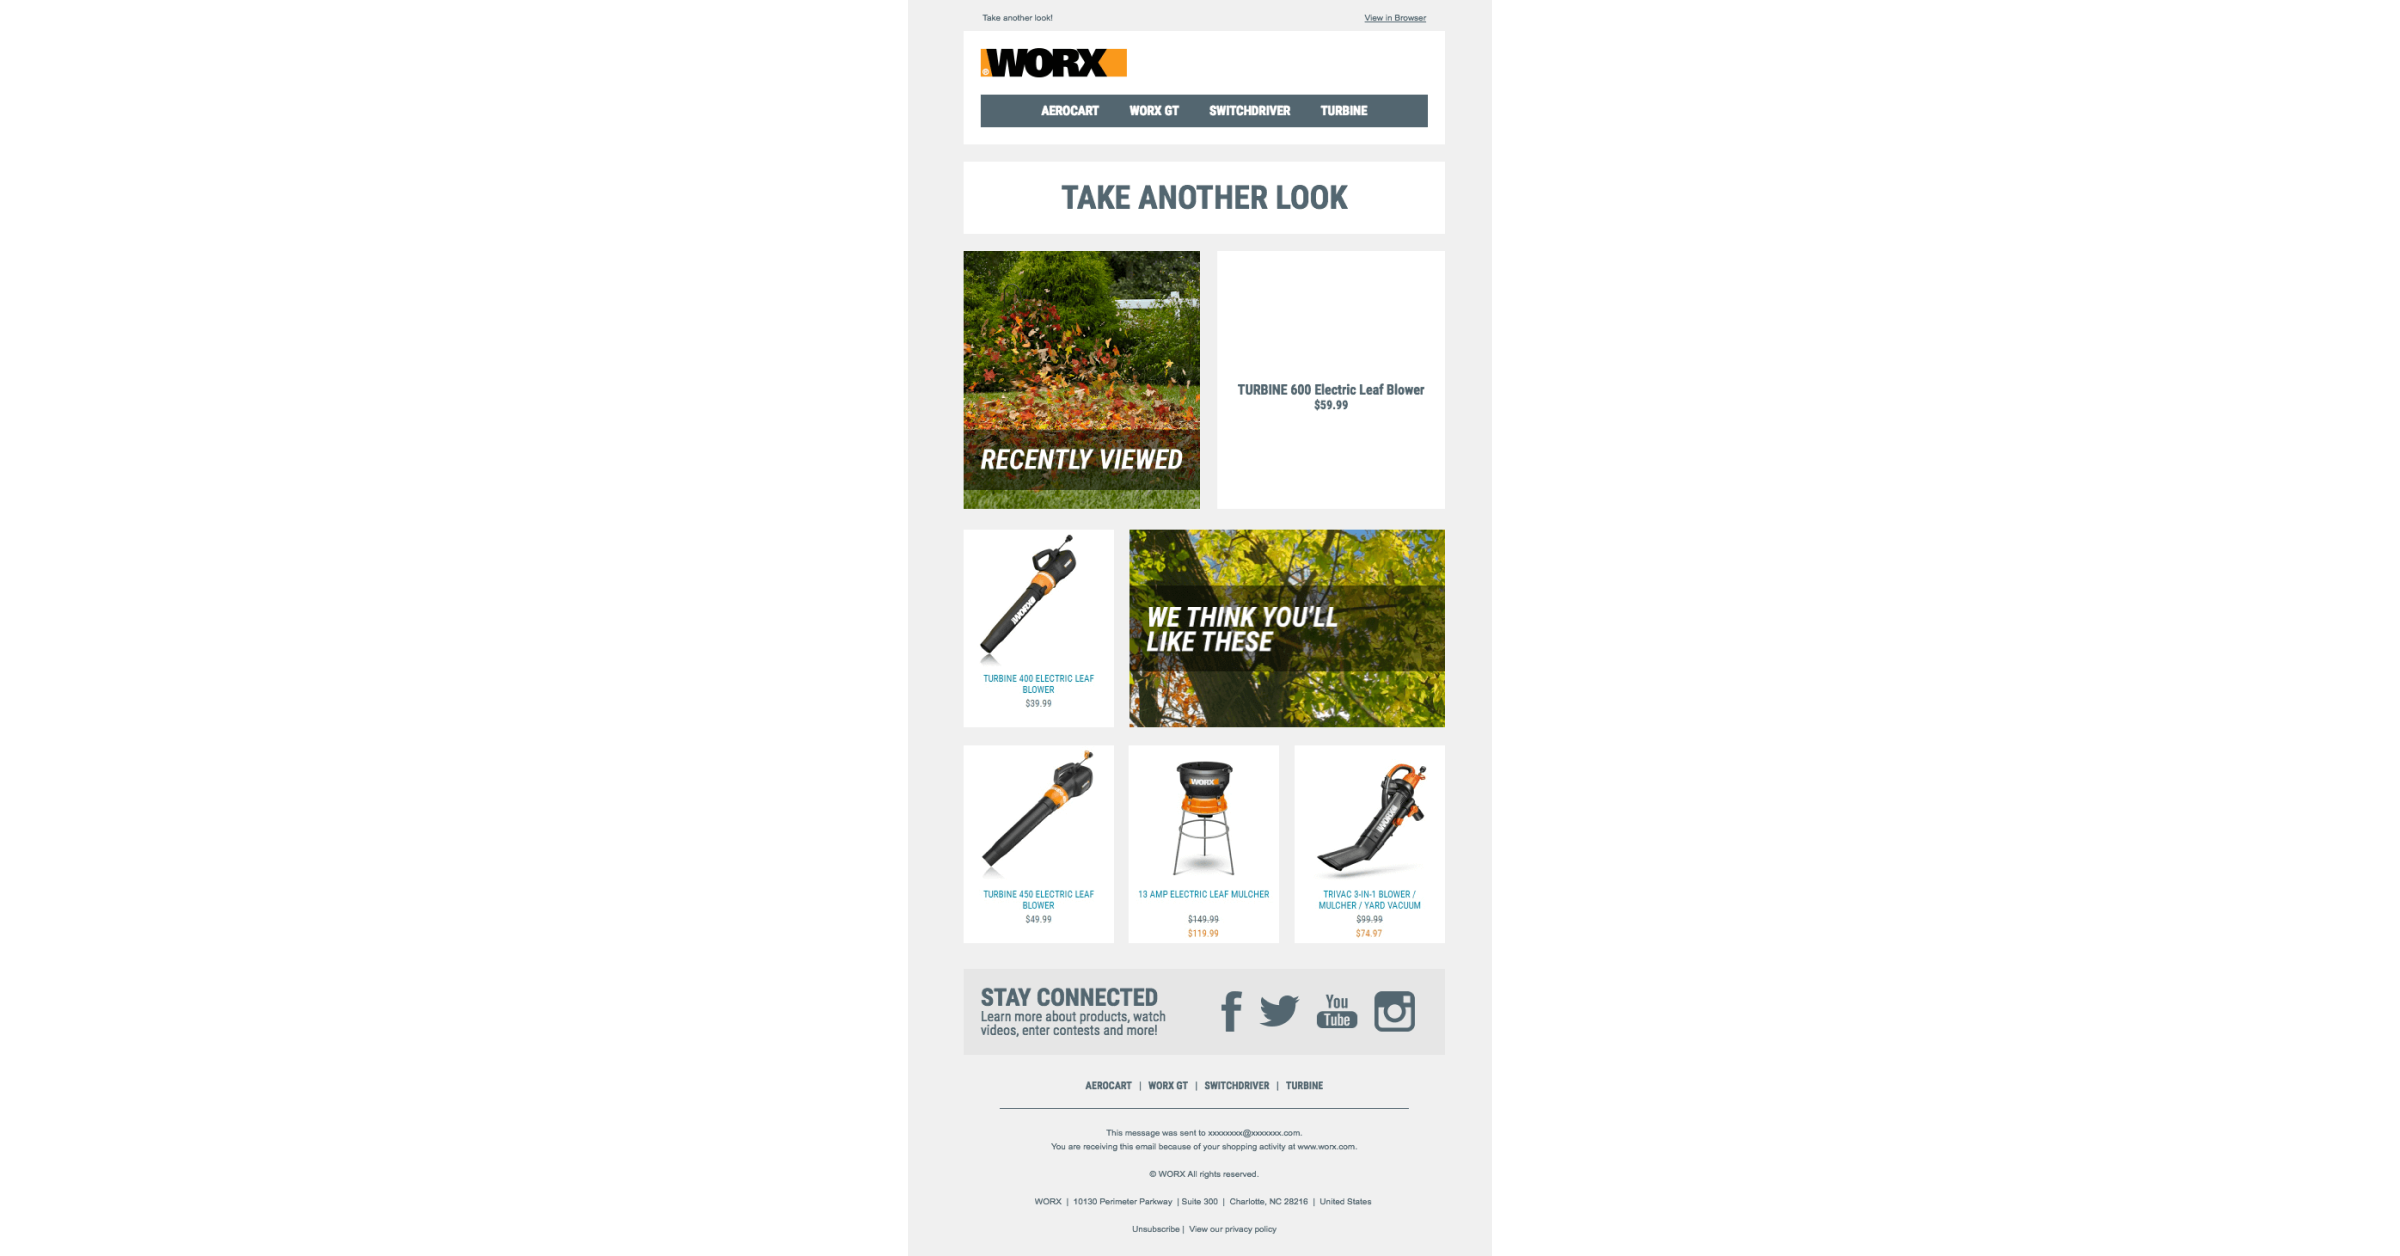 Product recommendations via automated email by Worx